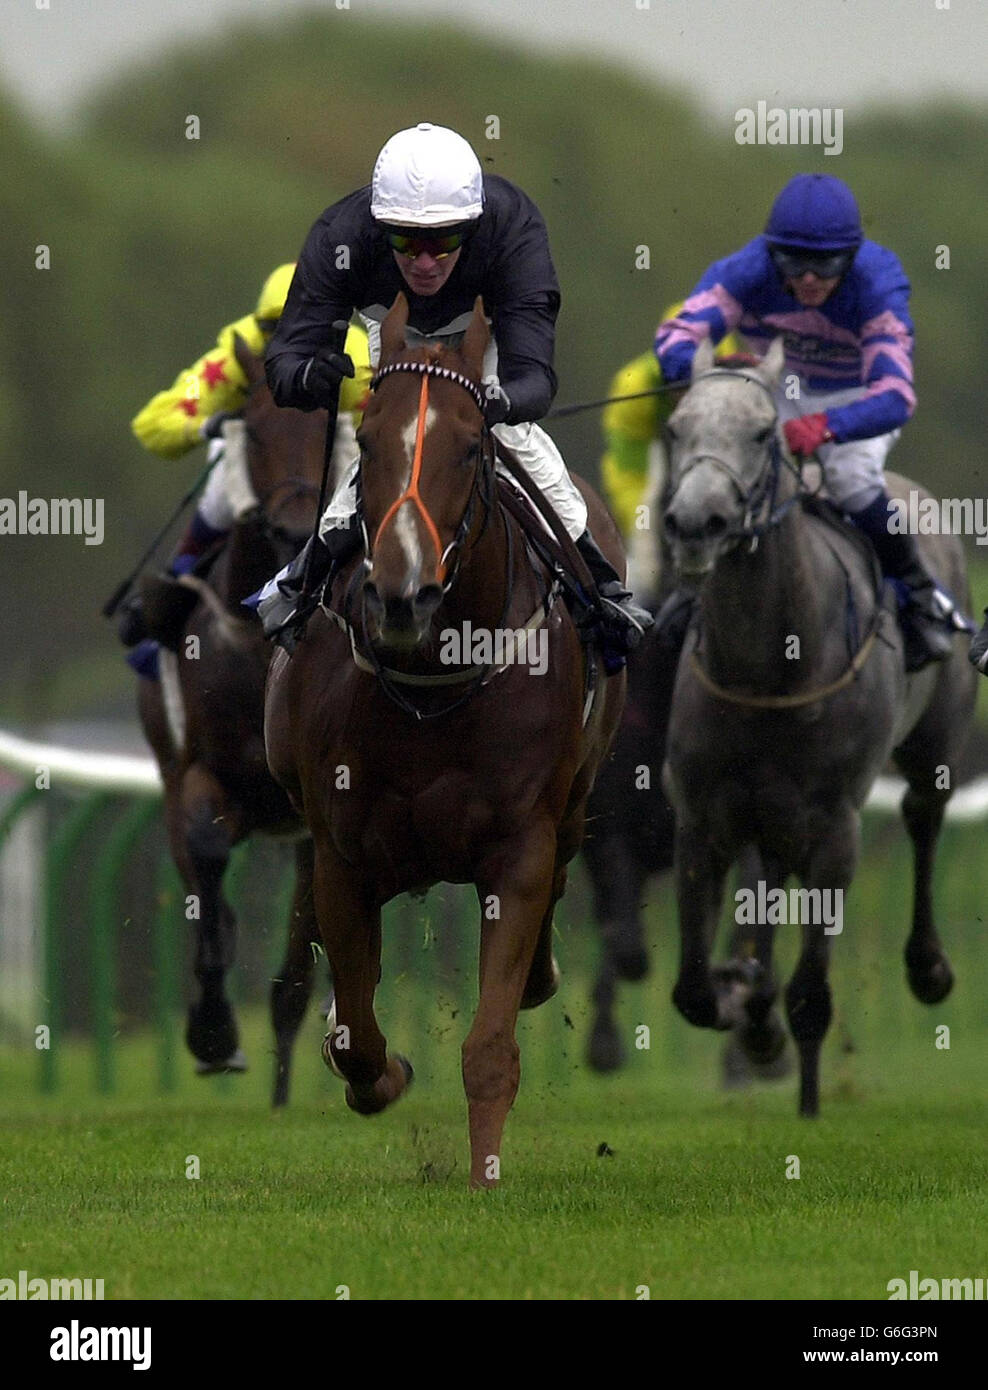 Brave Burt, ridden by Richard Hughes, wins the 2.45 Tote Bigger Winnings Handicap Rated Stakes at the Western Meeting at Ayr Racecourse, Scotland. Stock Photo